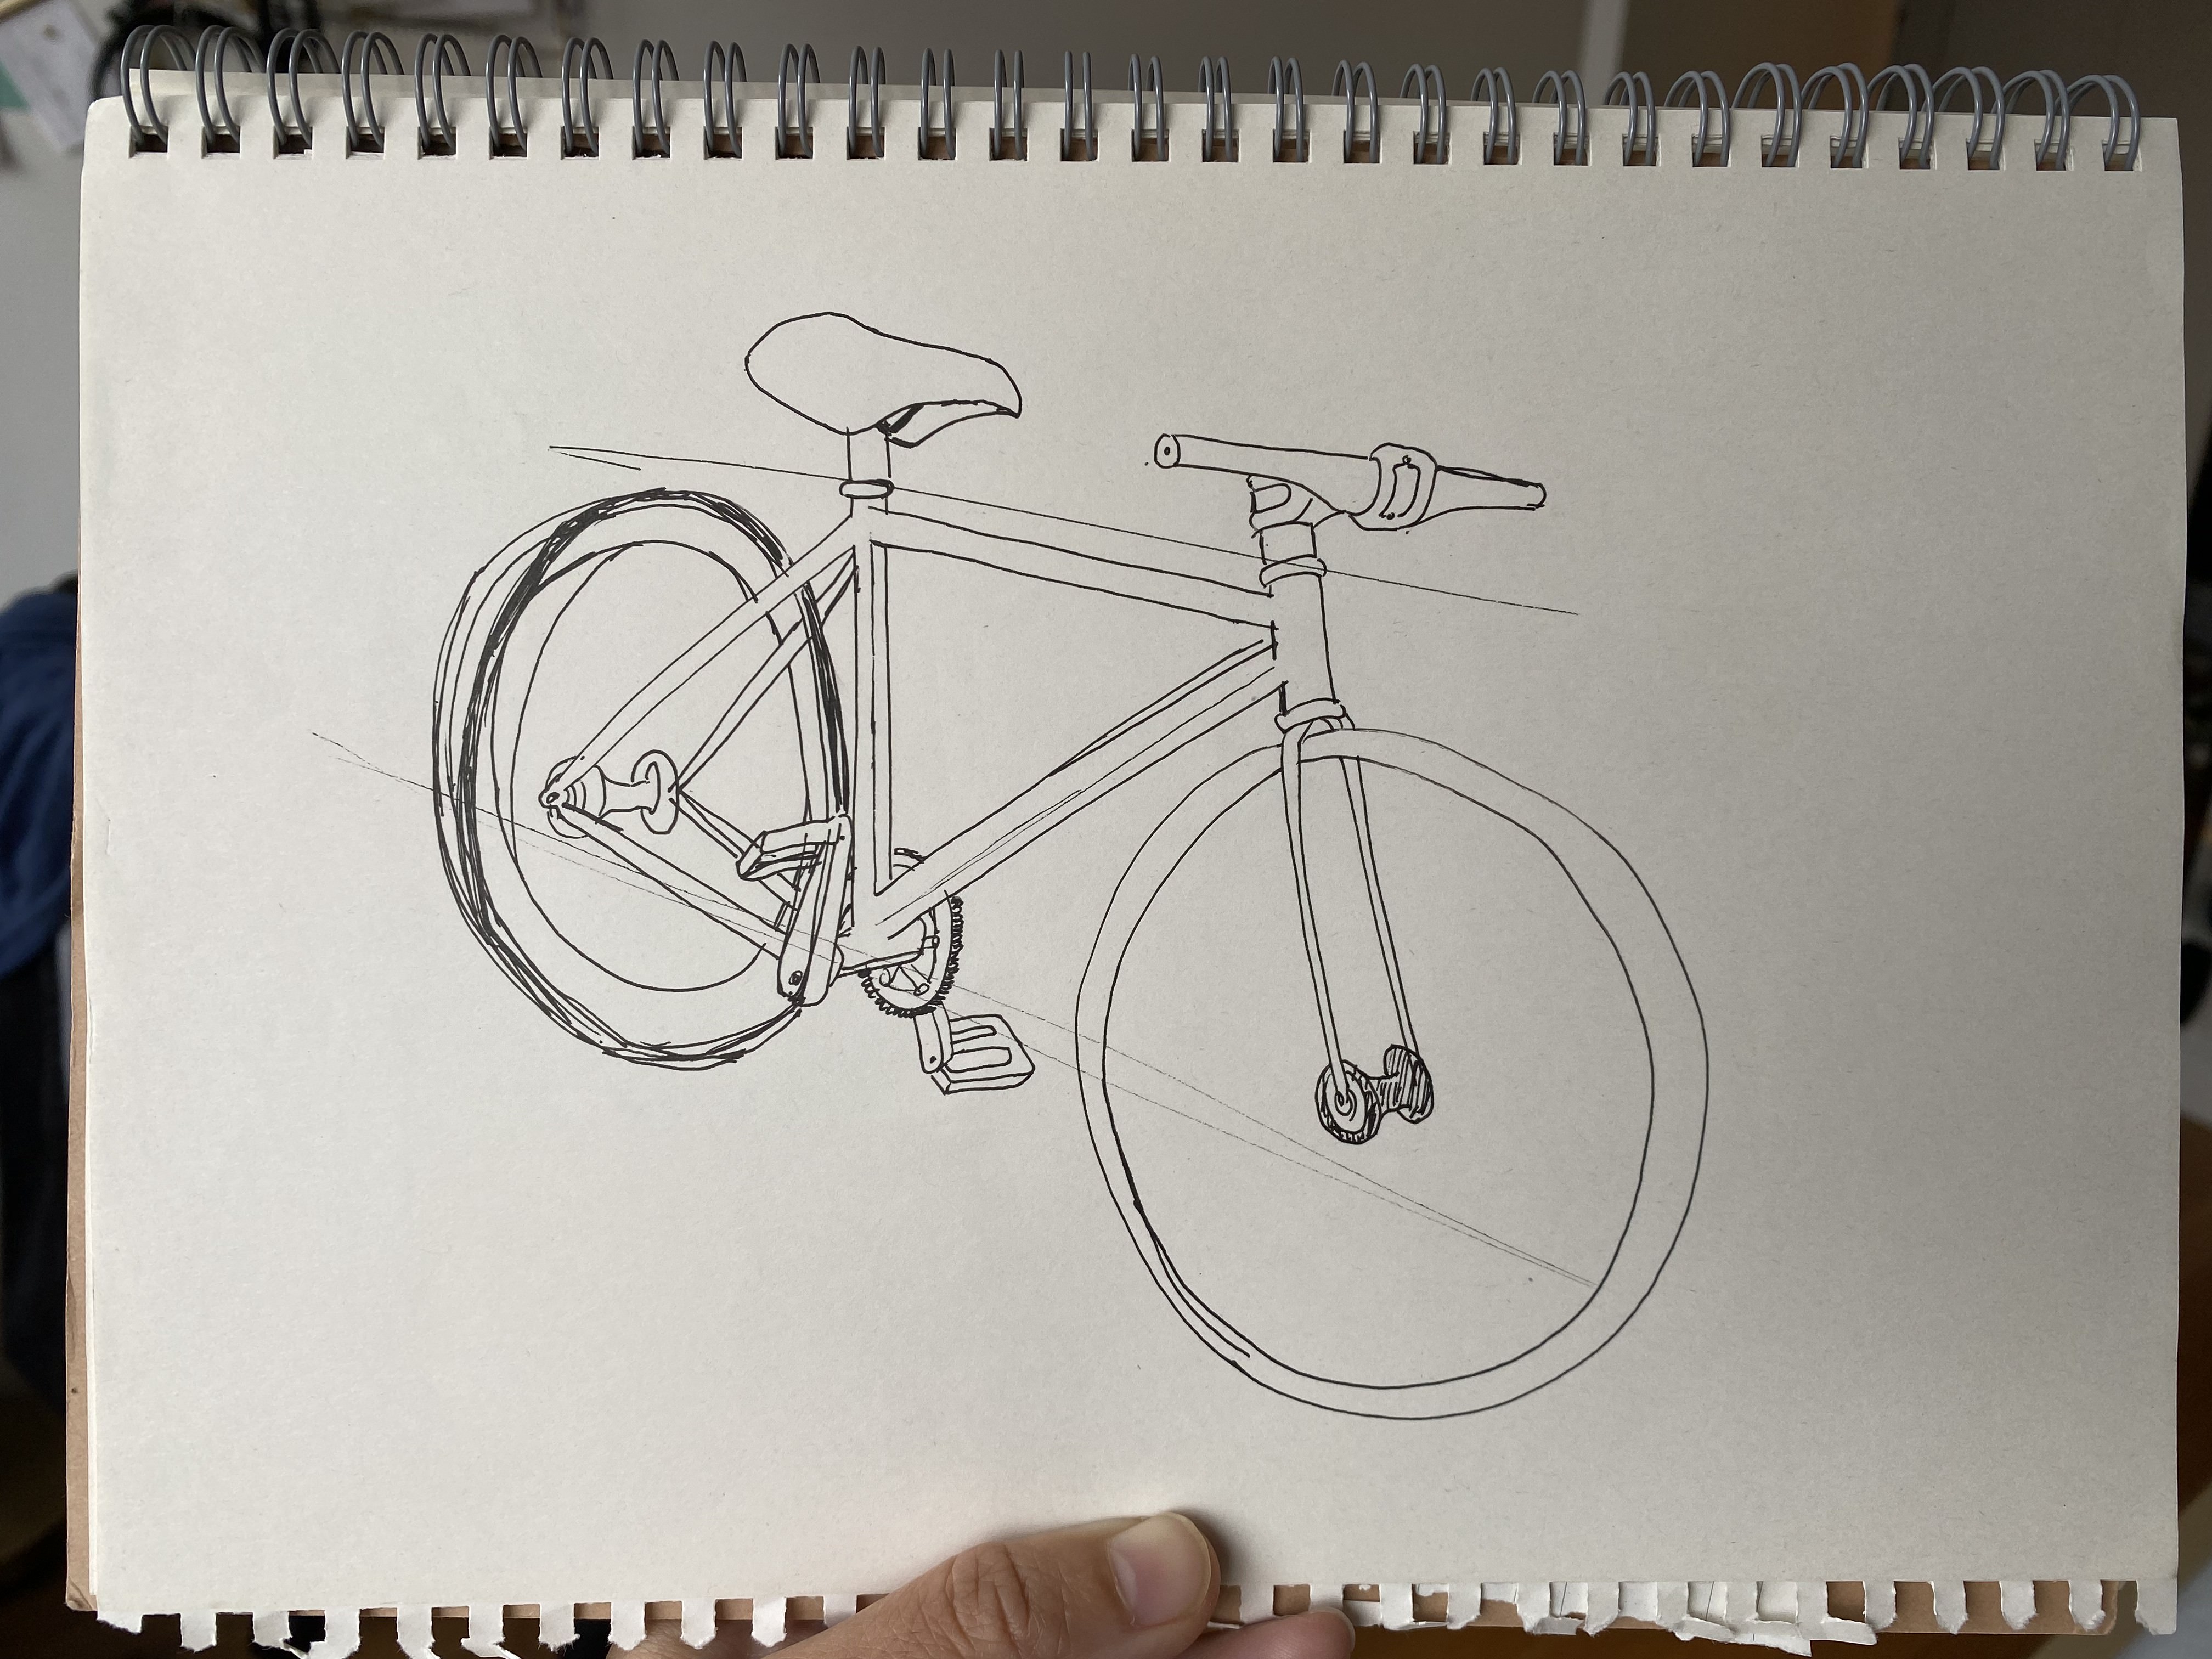 A less rudimentary sketch of a bicycle similar to the 2nd